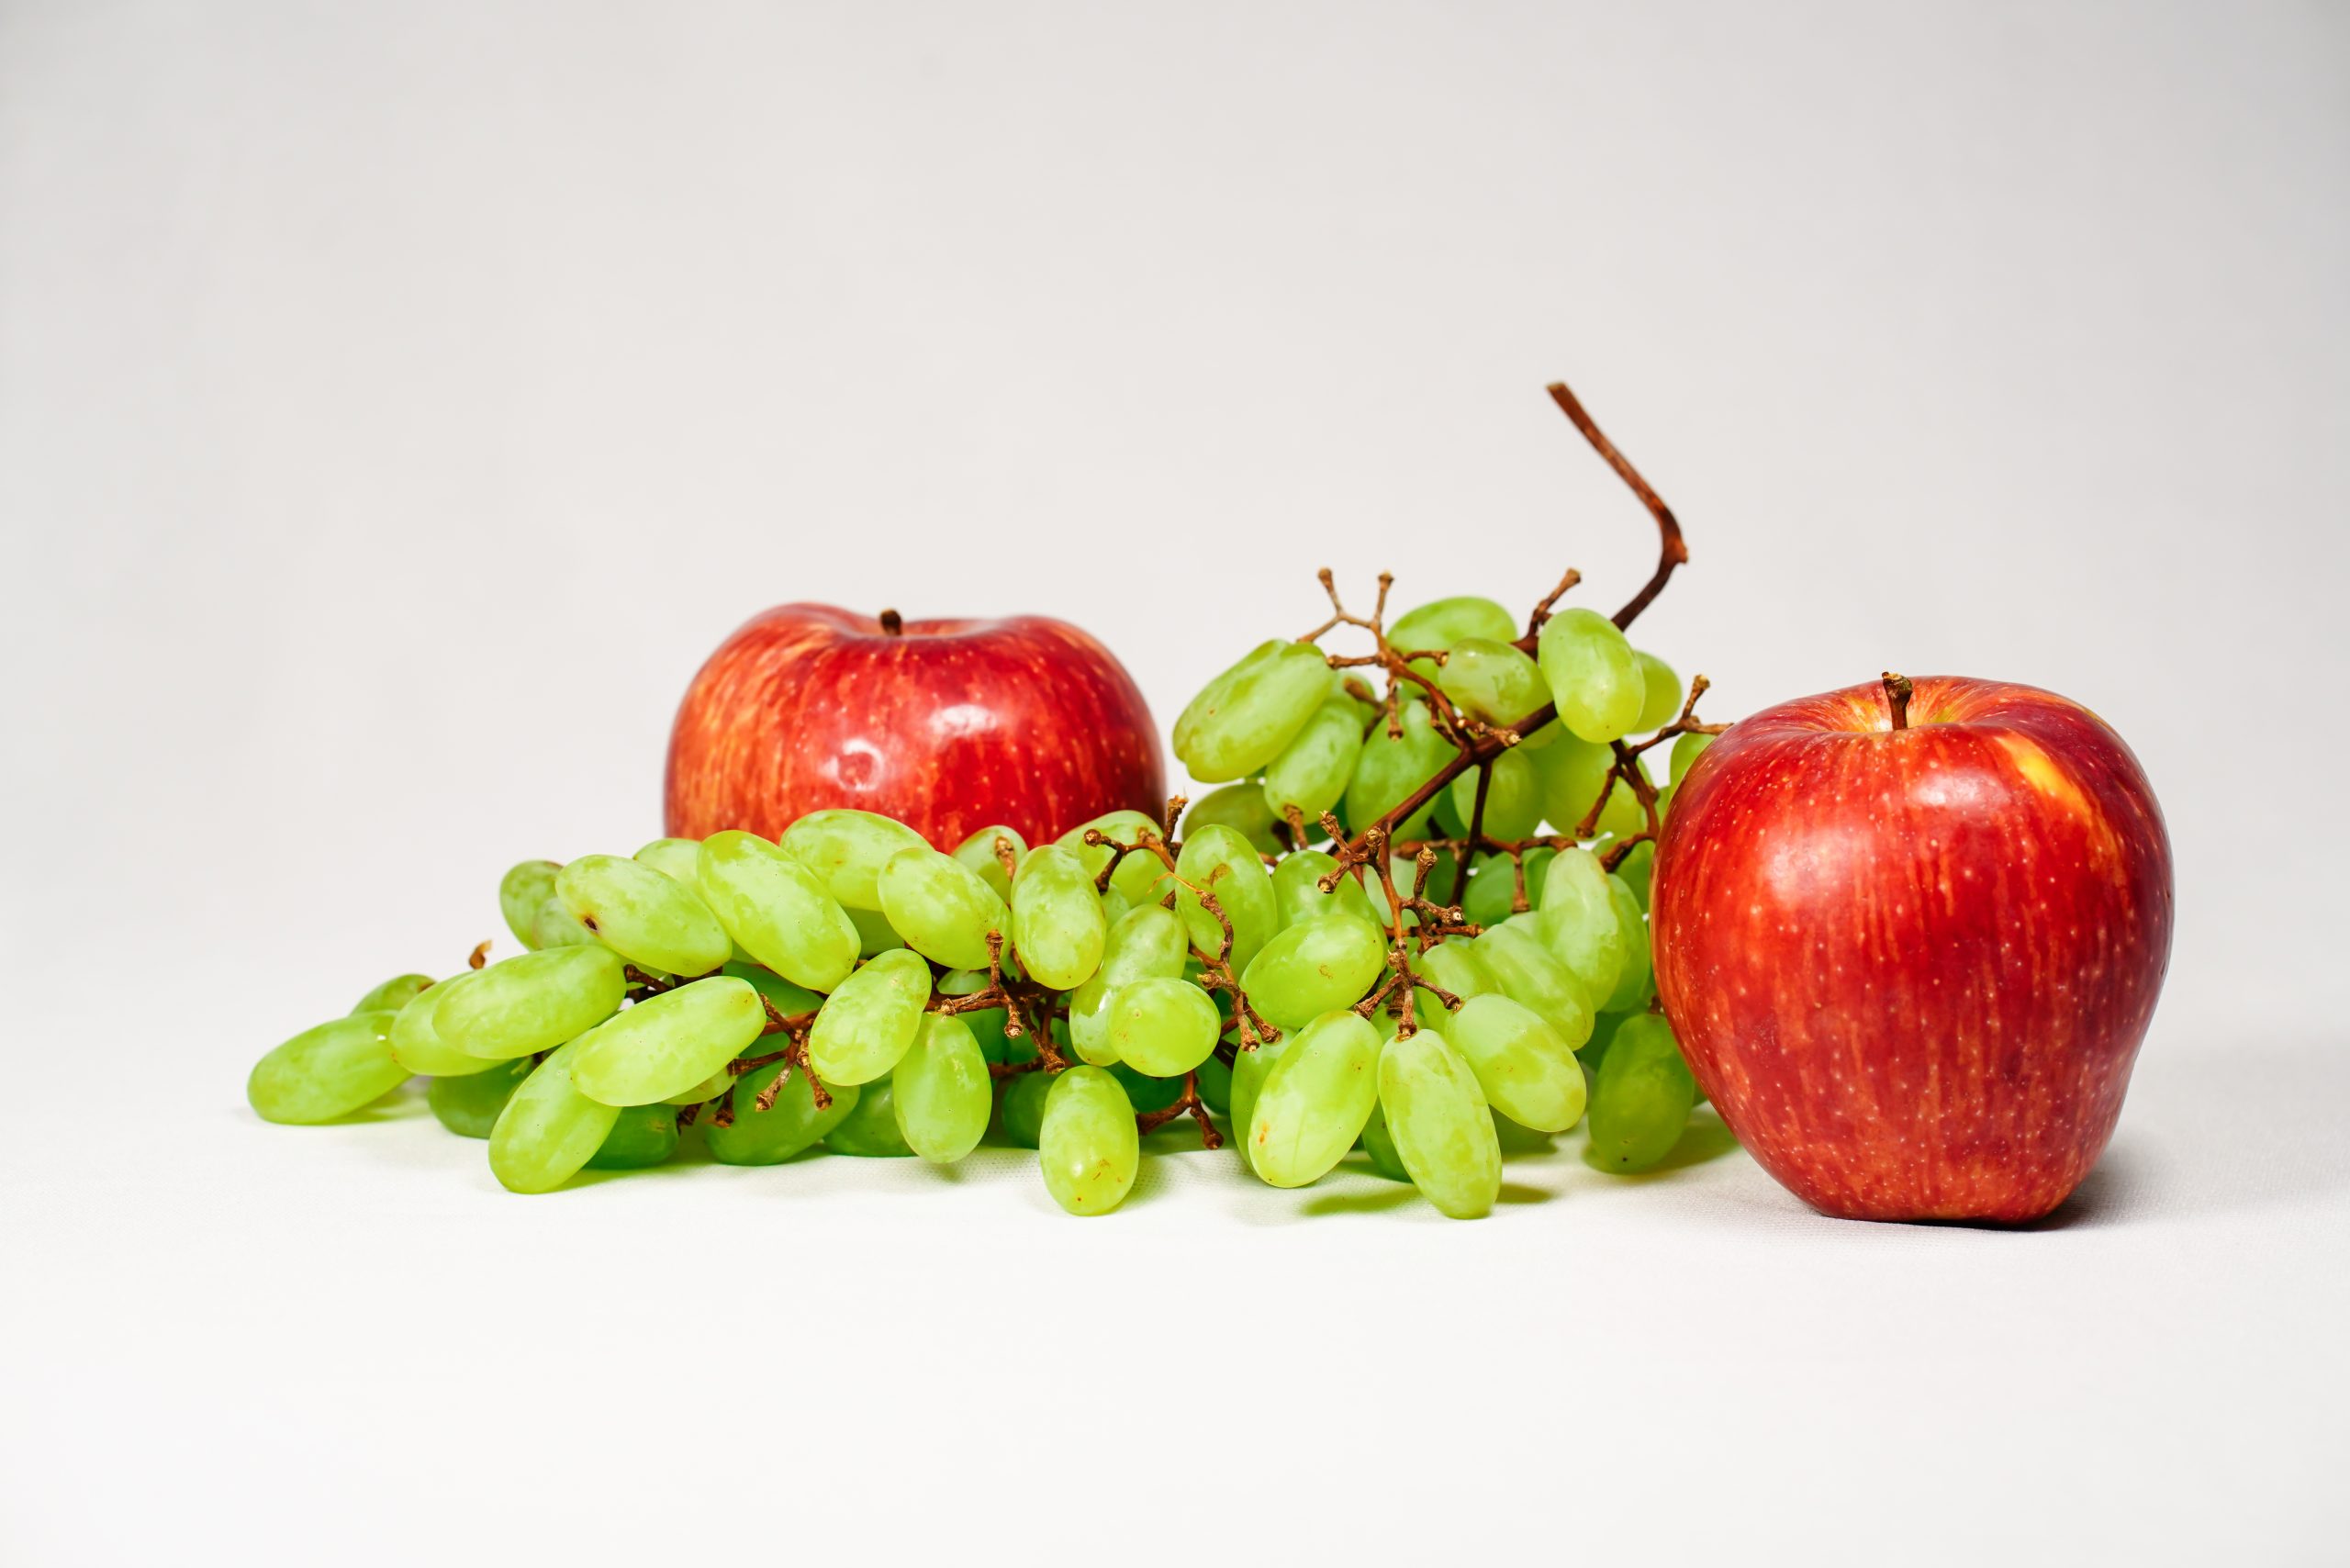 Grapes and two apple